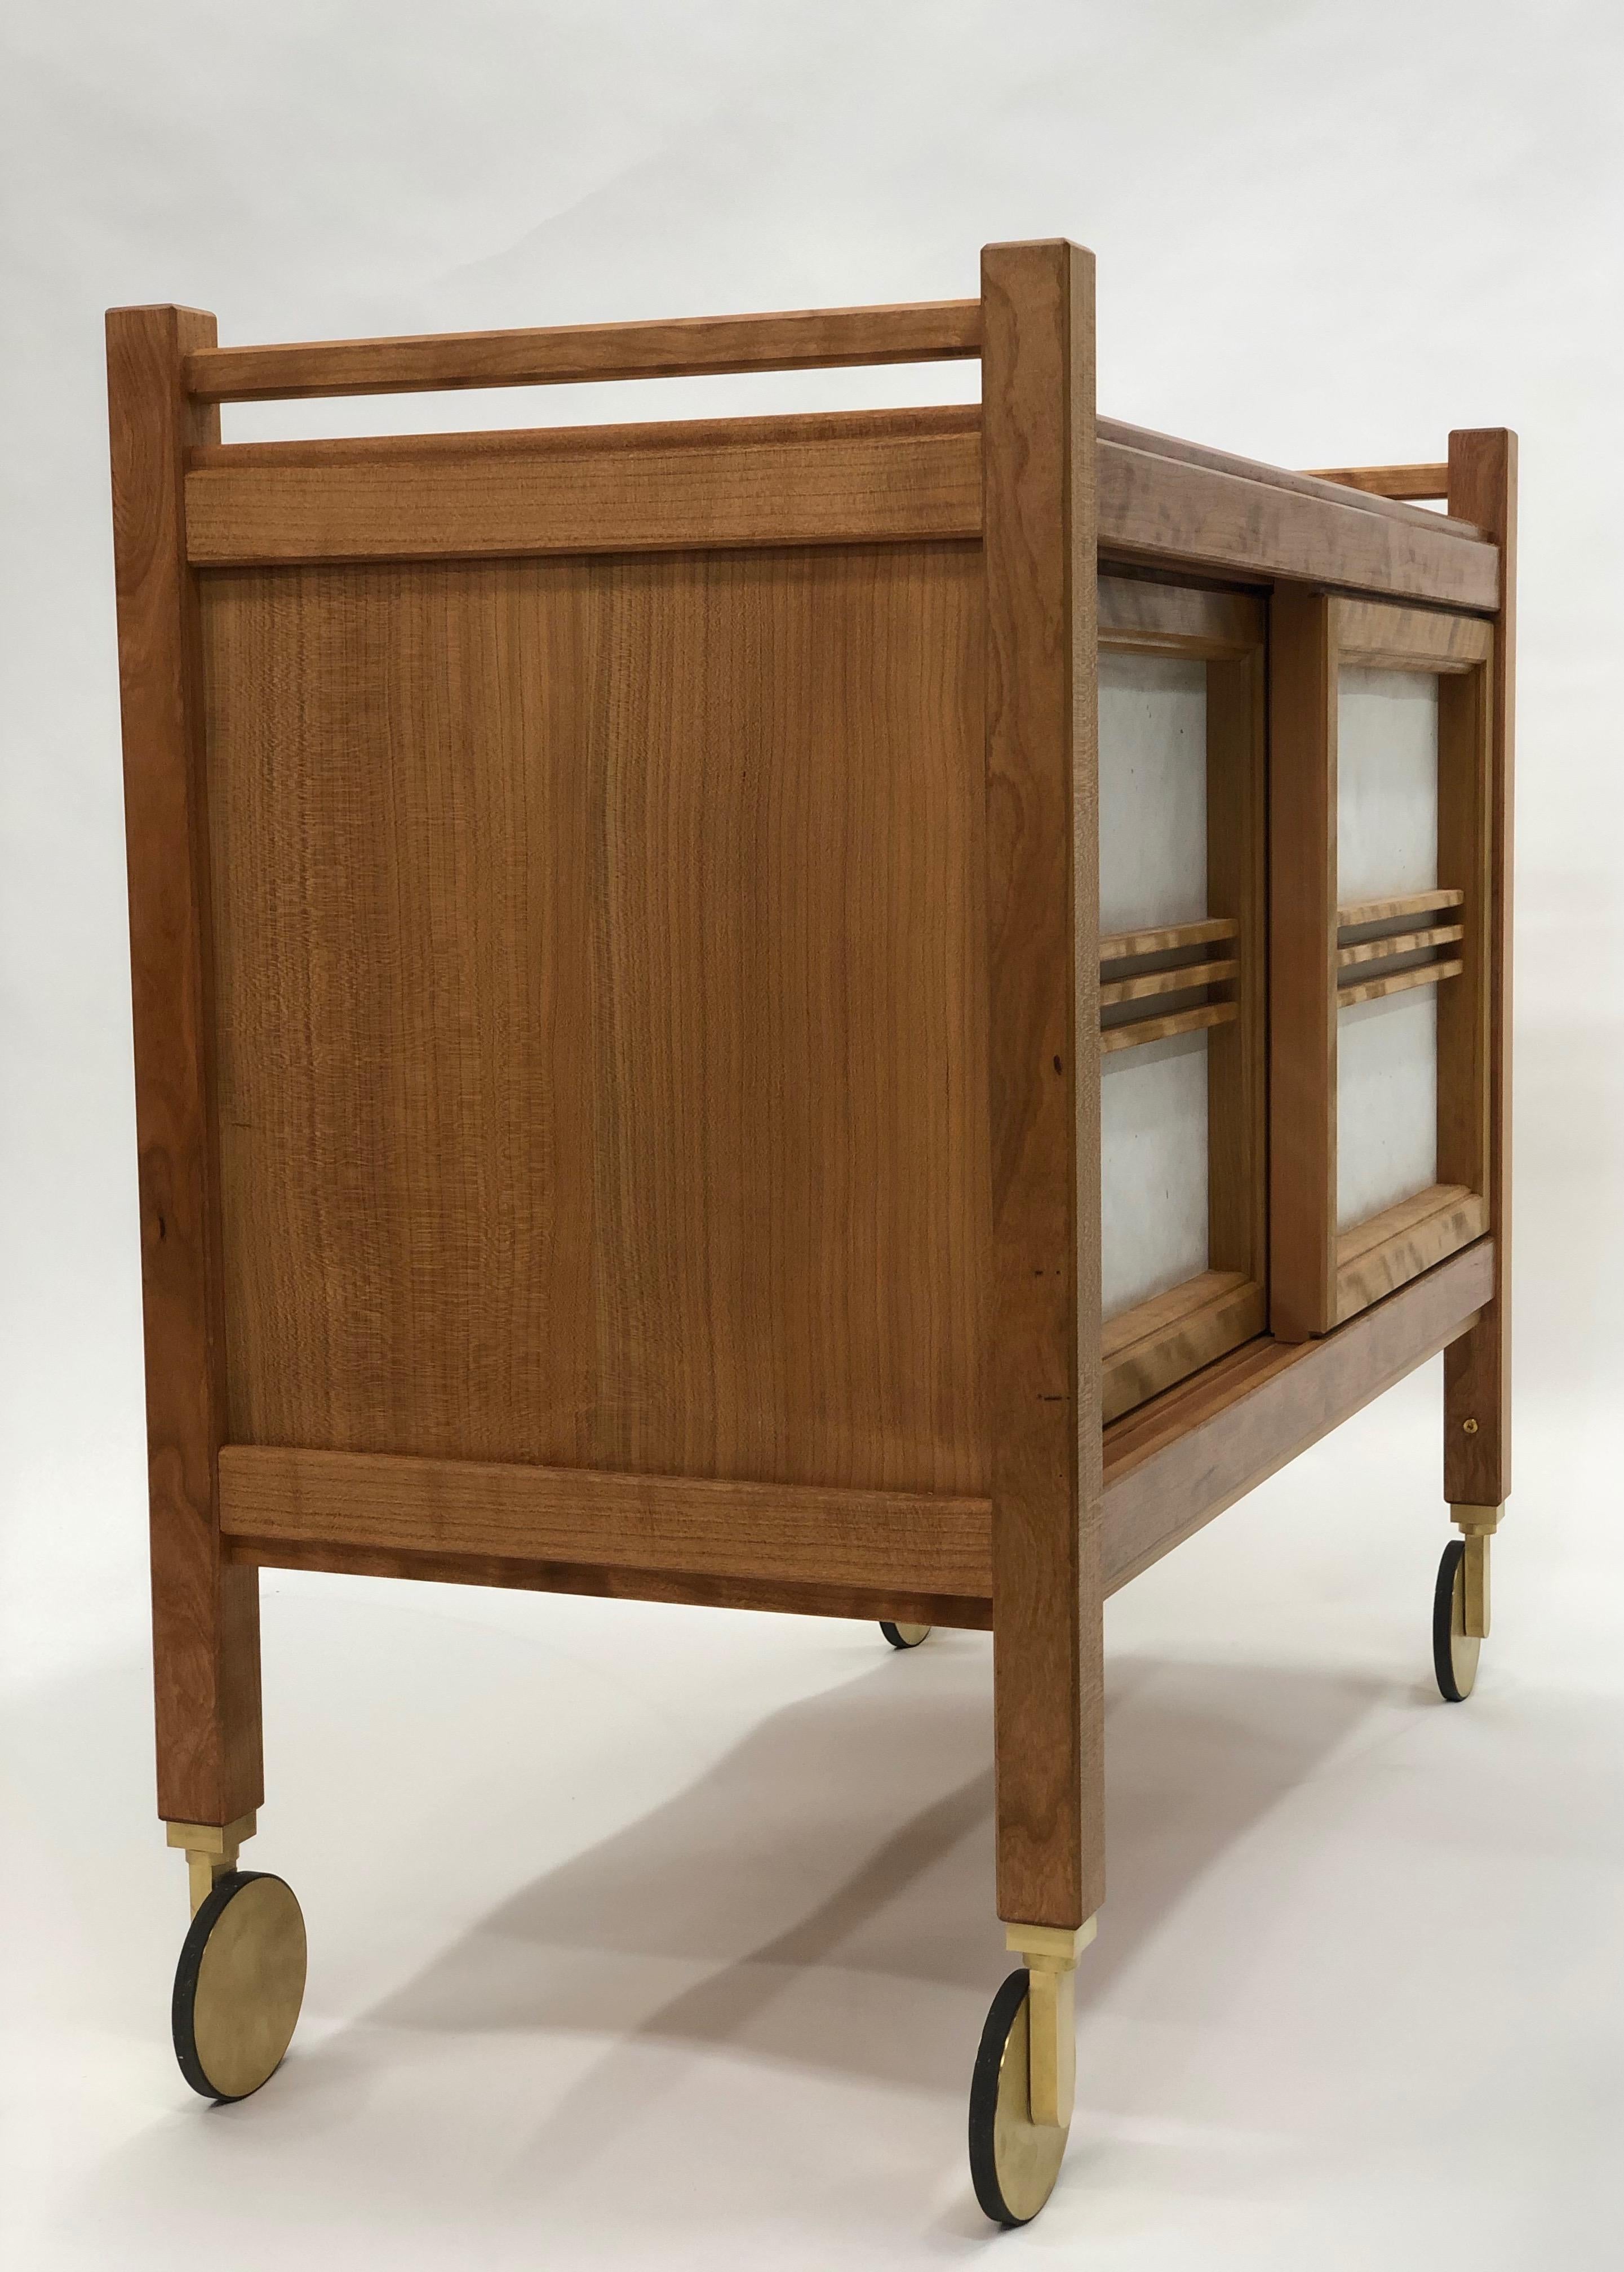 Blending my influence of sashimono craftsmen and that of finely finished and carefully machined brass hardware to create a bar cart which is built using traditional handmade wood joinery with that of manually machined brass casters.

This rolling